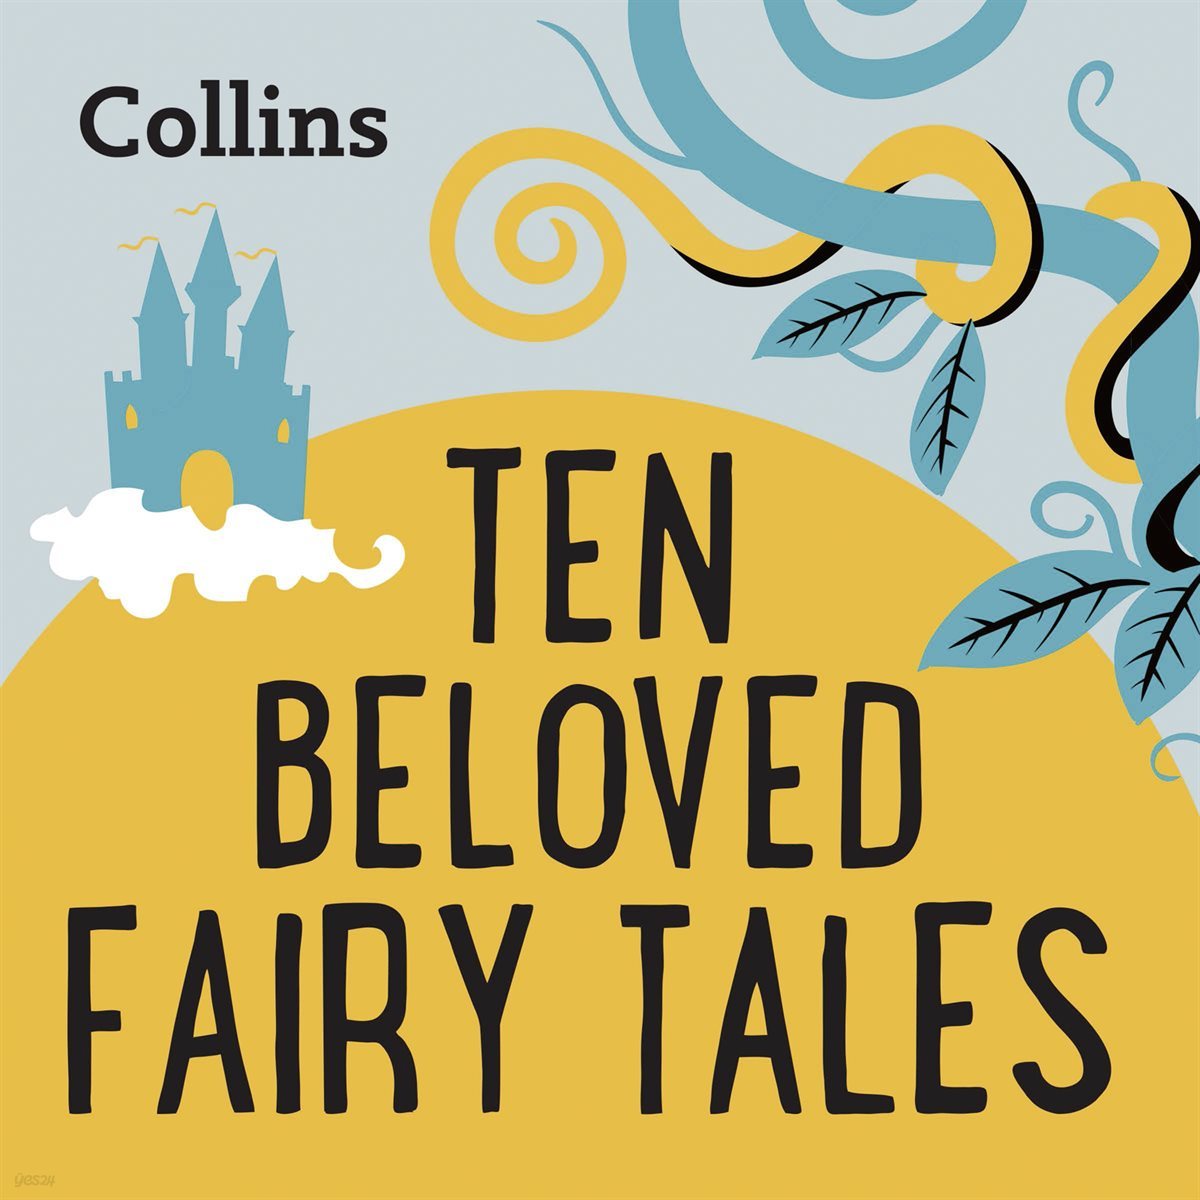 [UK Eng] TEN BELOVED FAIRY-TALES: For ages 7-11 -Collins